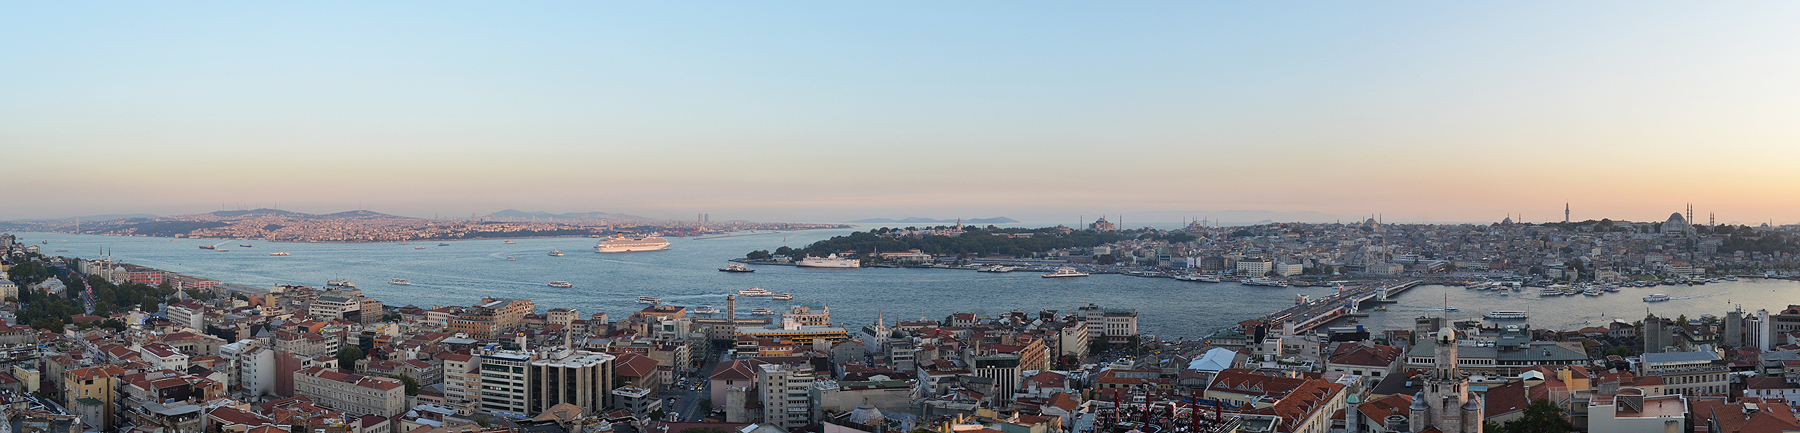 Istanbul from the Galata Tower